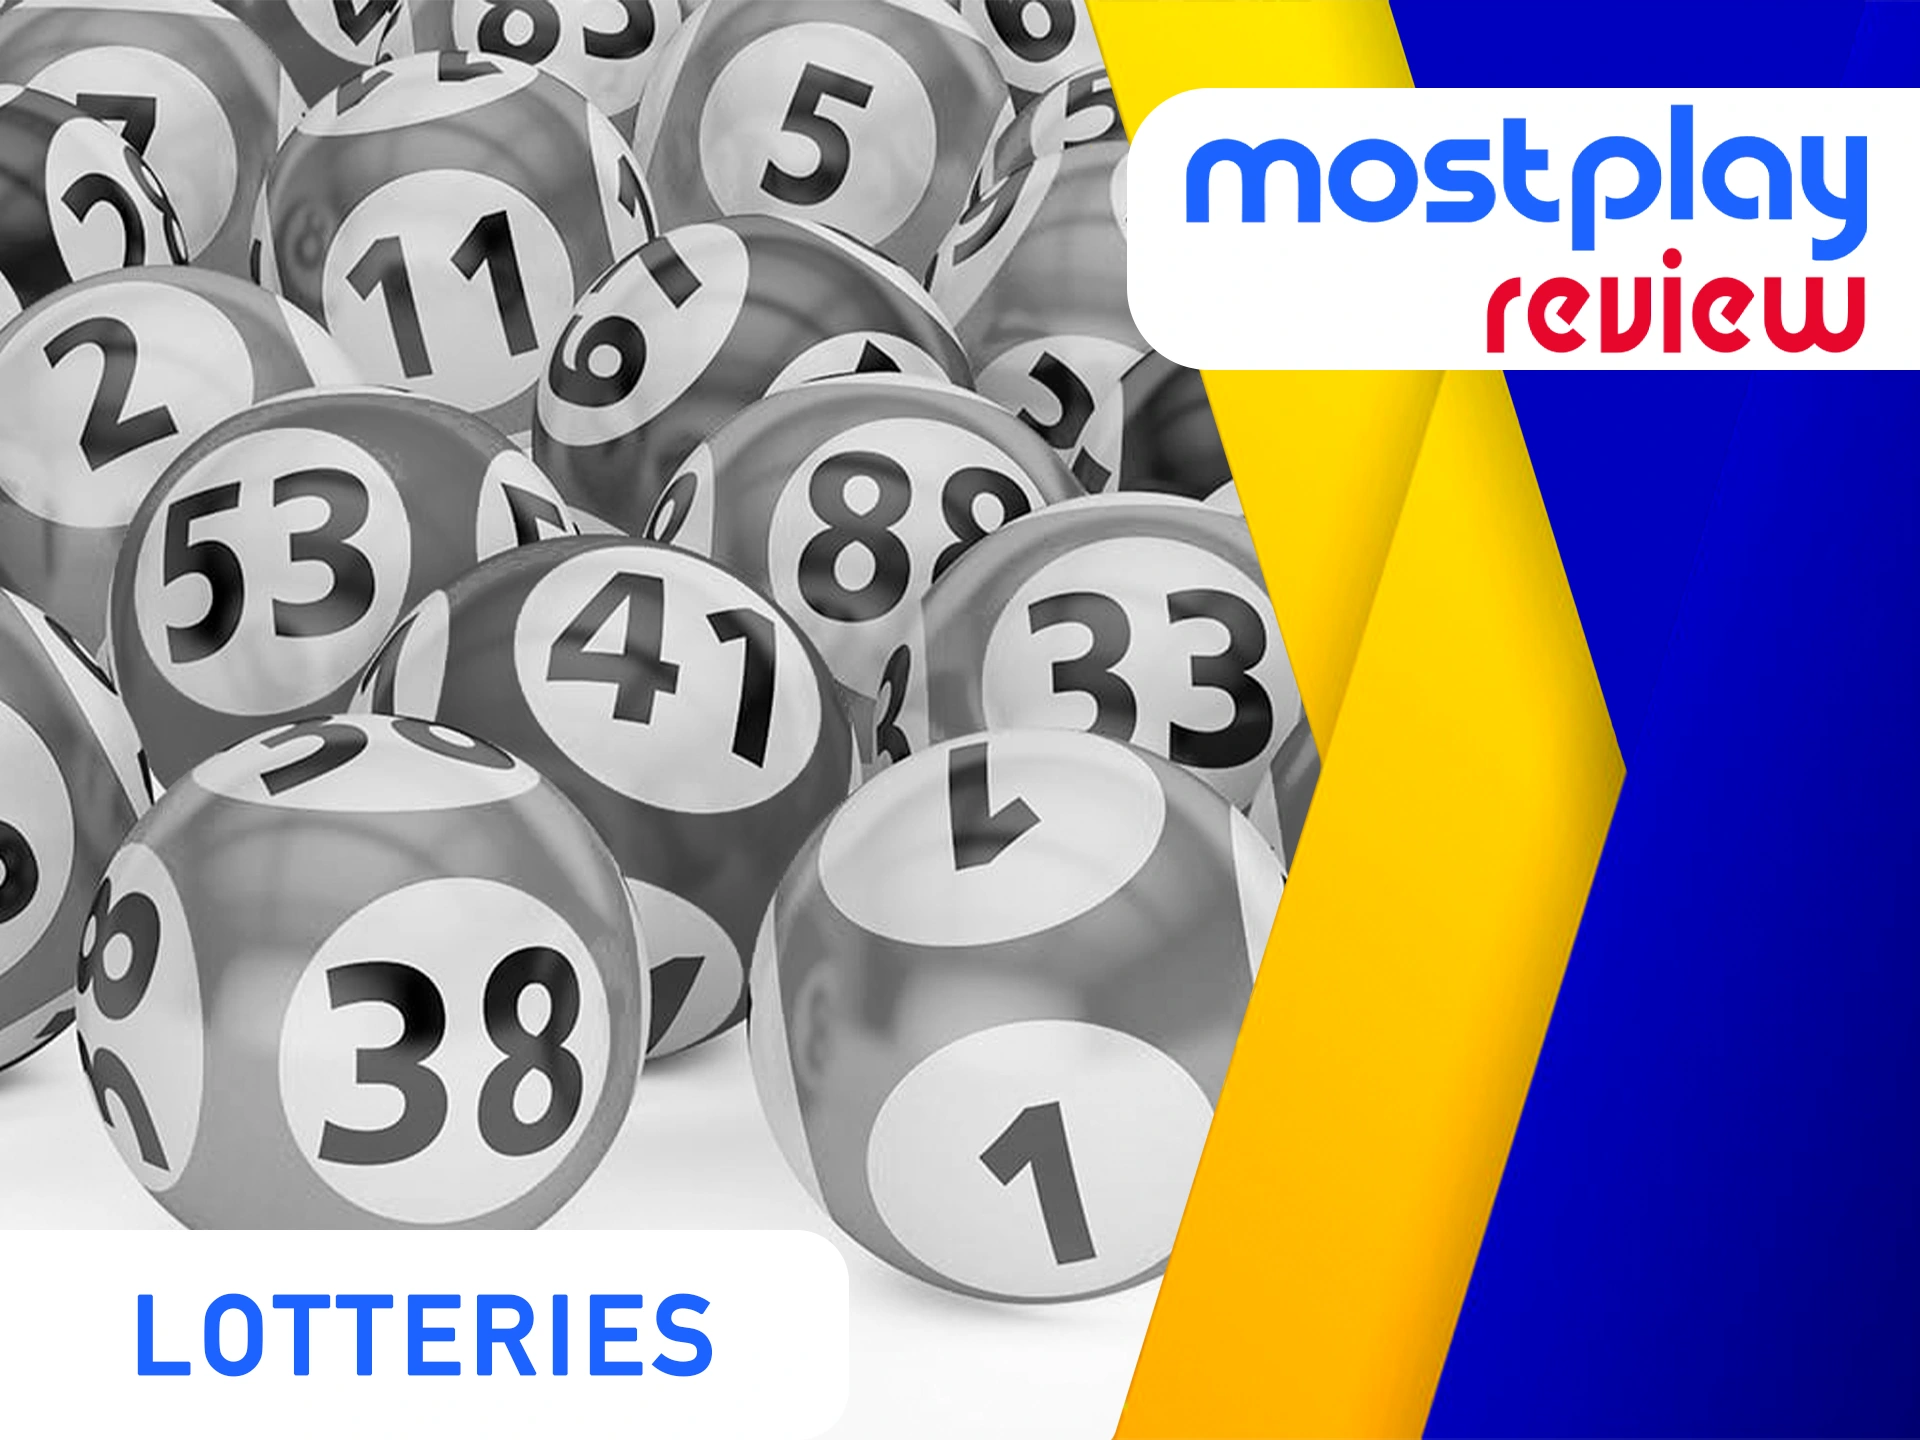 Win a huge amount of money by playing the Mostplay lottery.